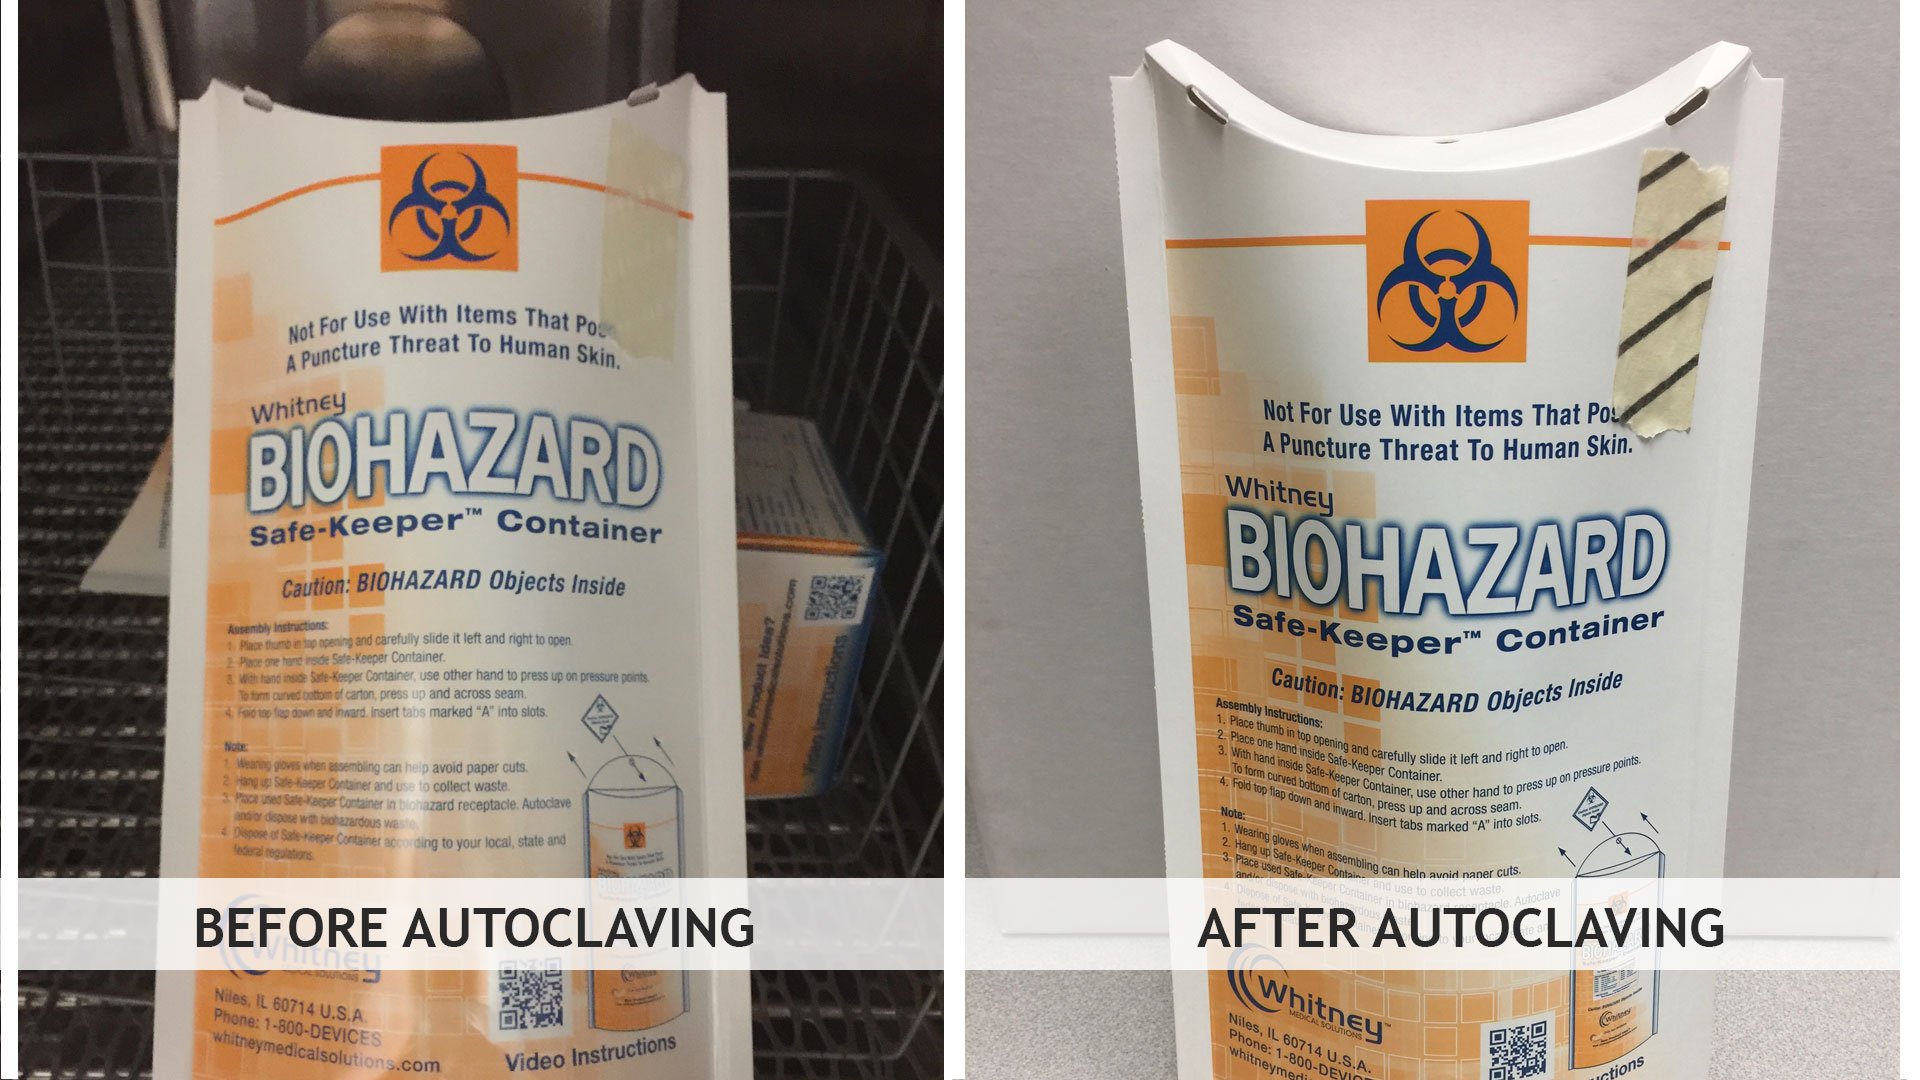 biohazard-autoclaving-SKout-1Biohazard Disposable Waste Container Autoclave Chemical Tape Outside